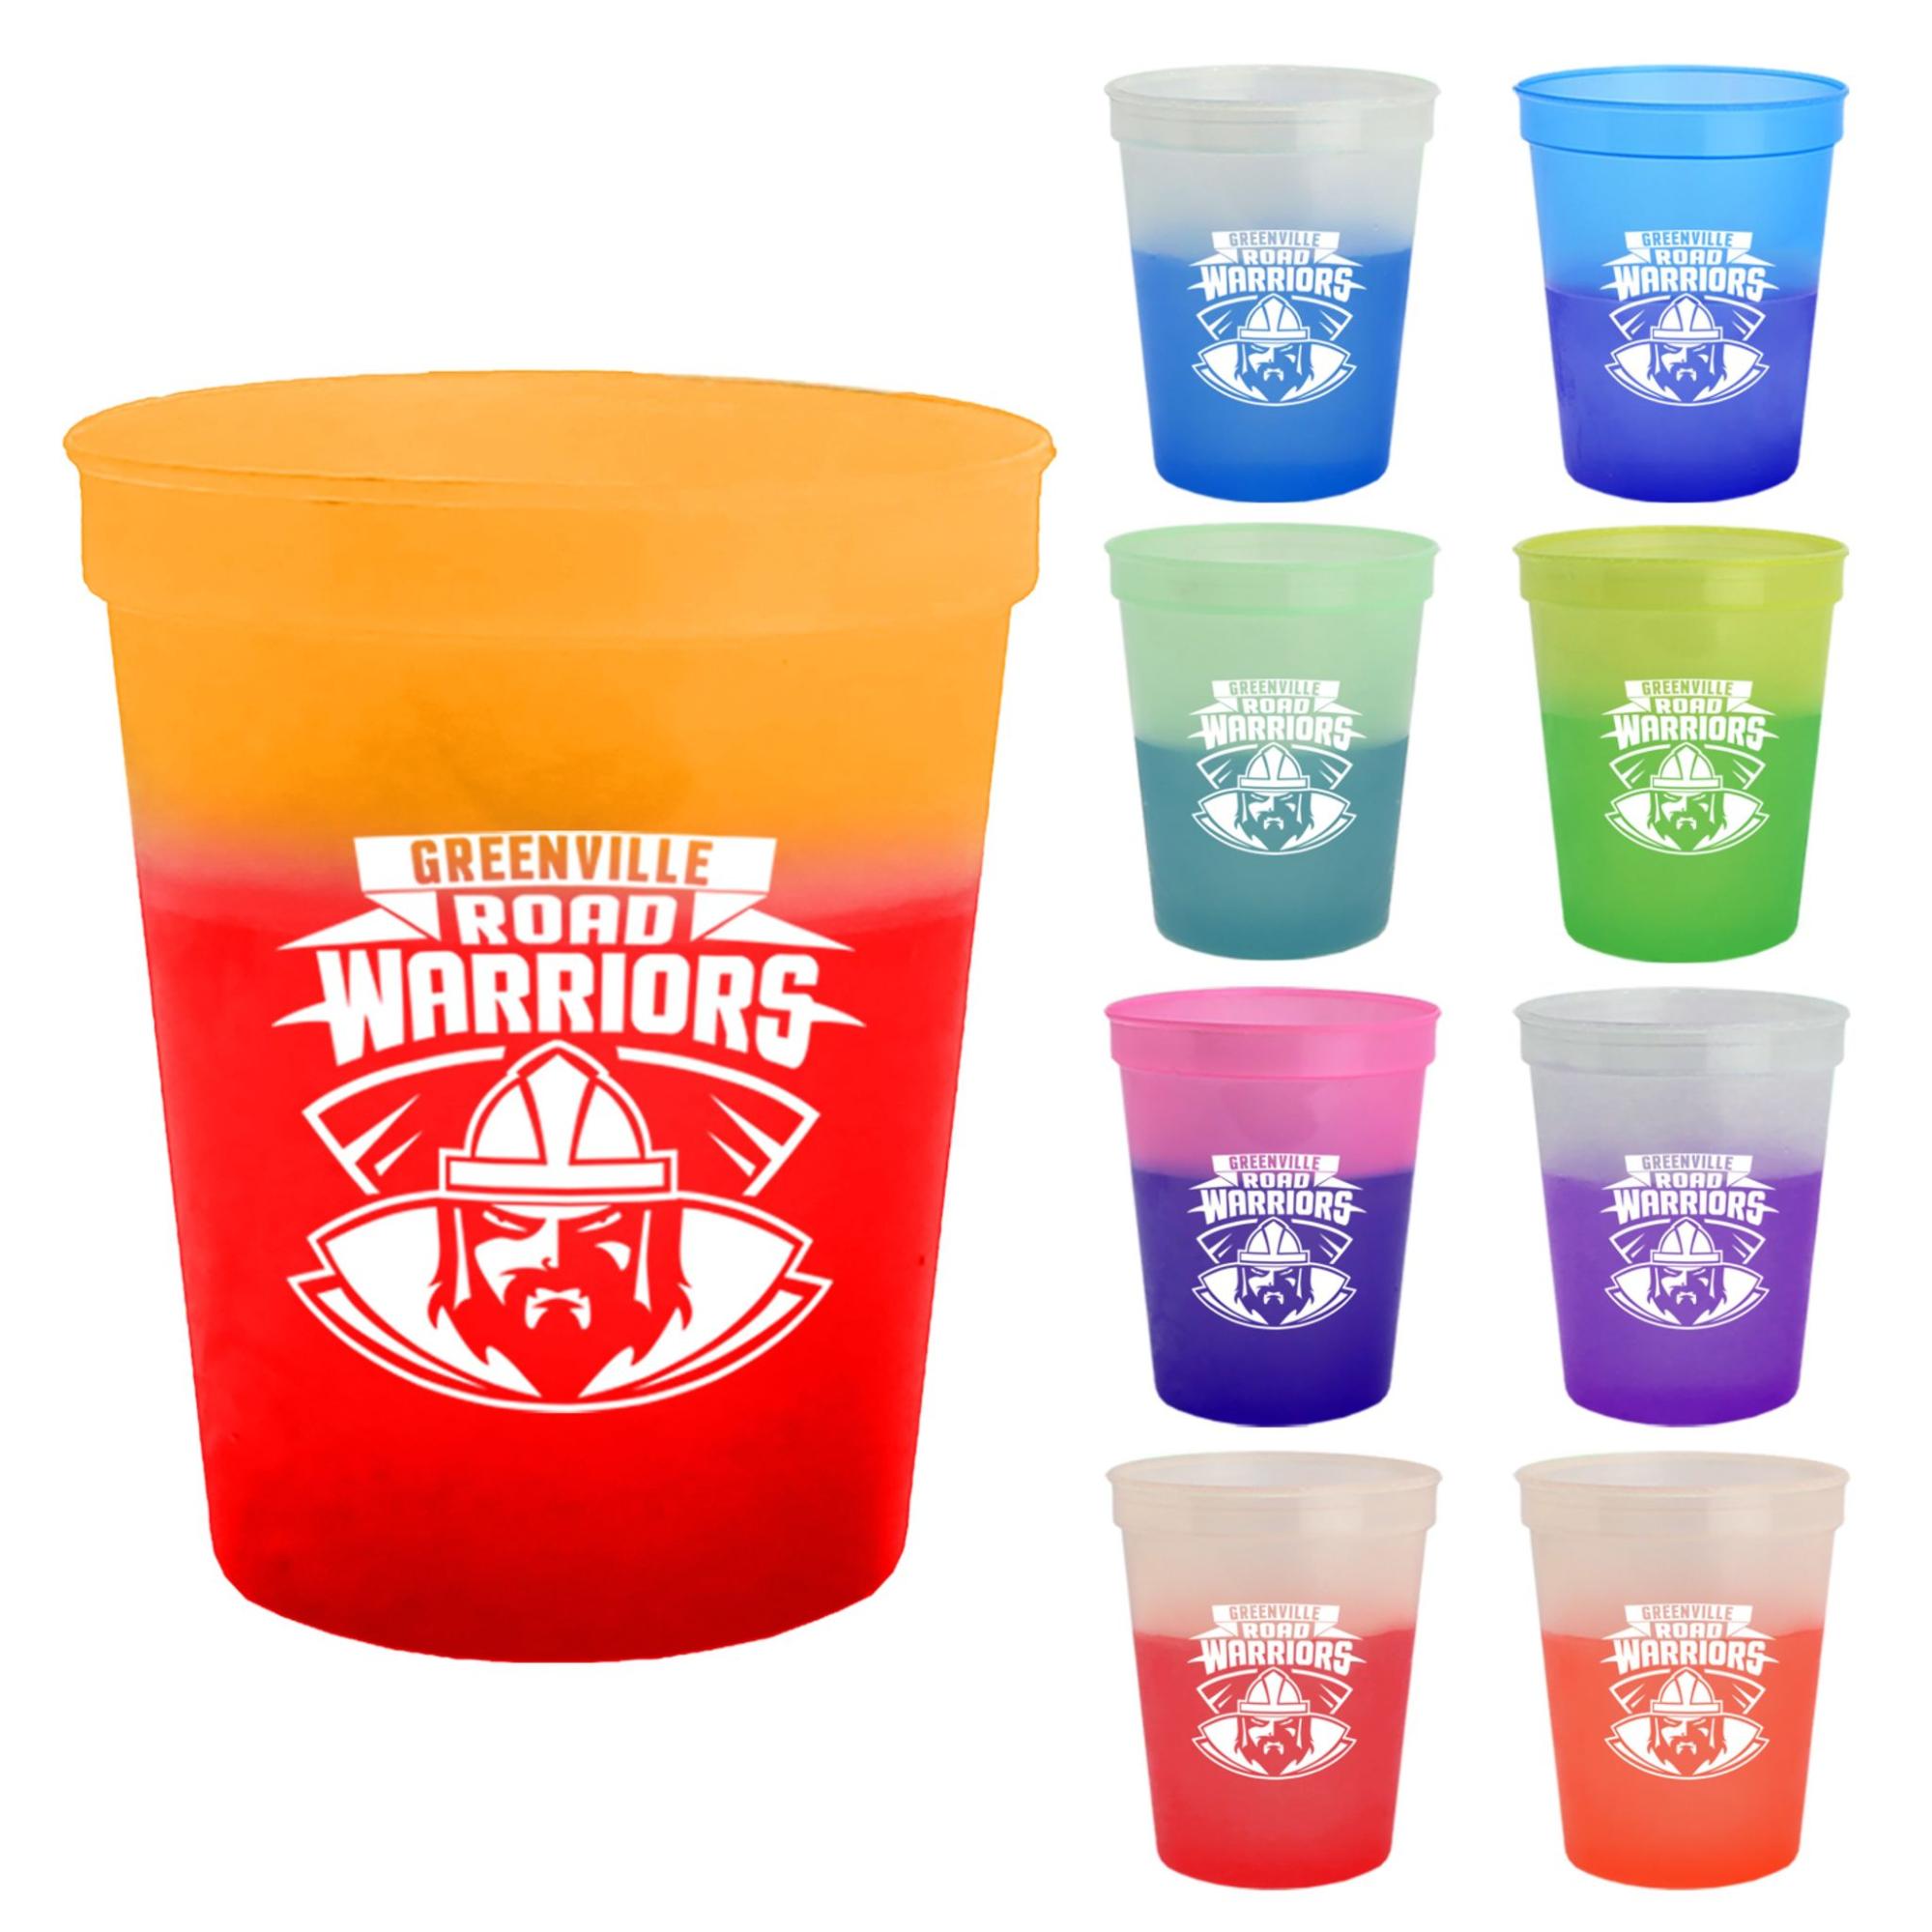 two-tone color-changing stadium cups for Halloween swag